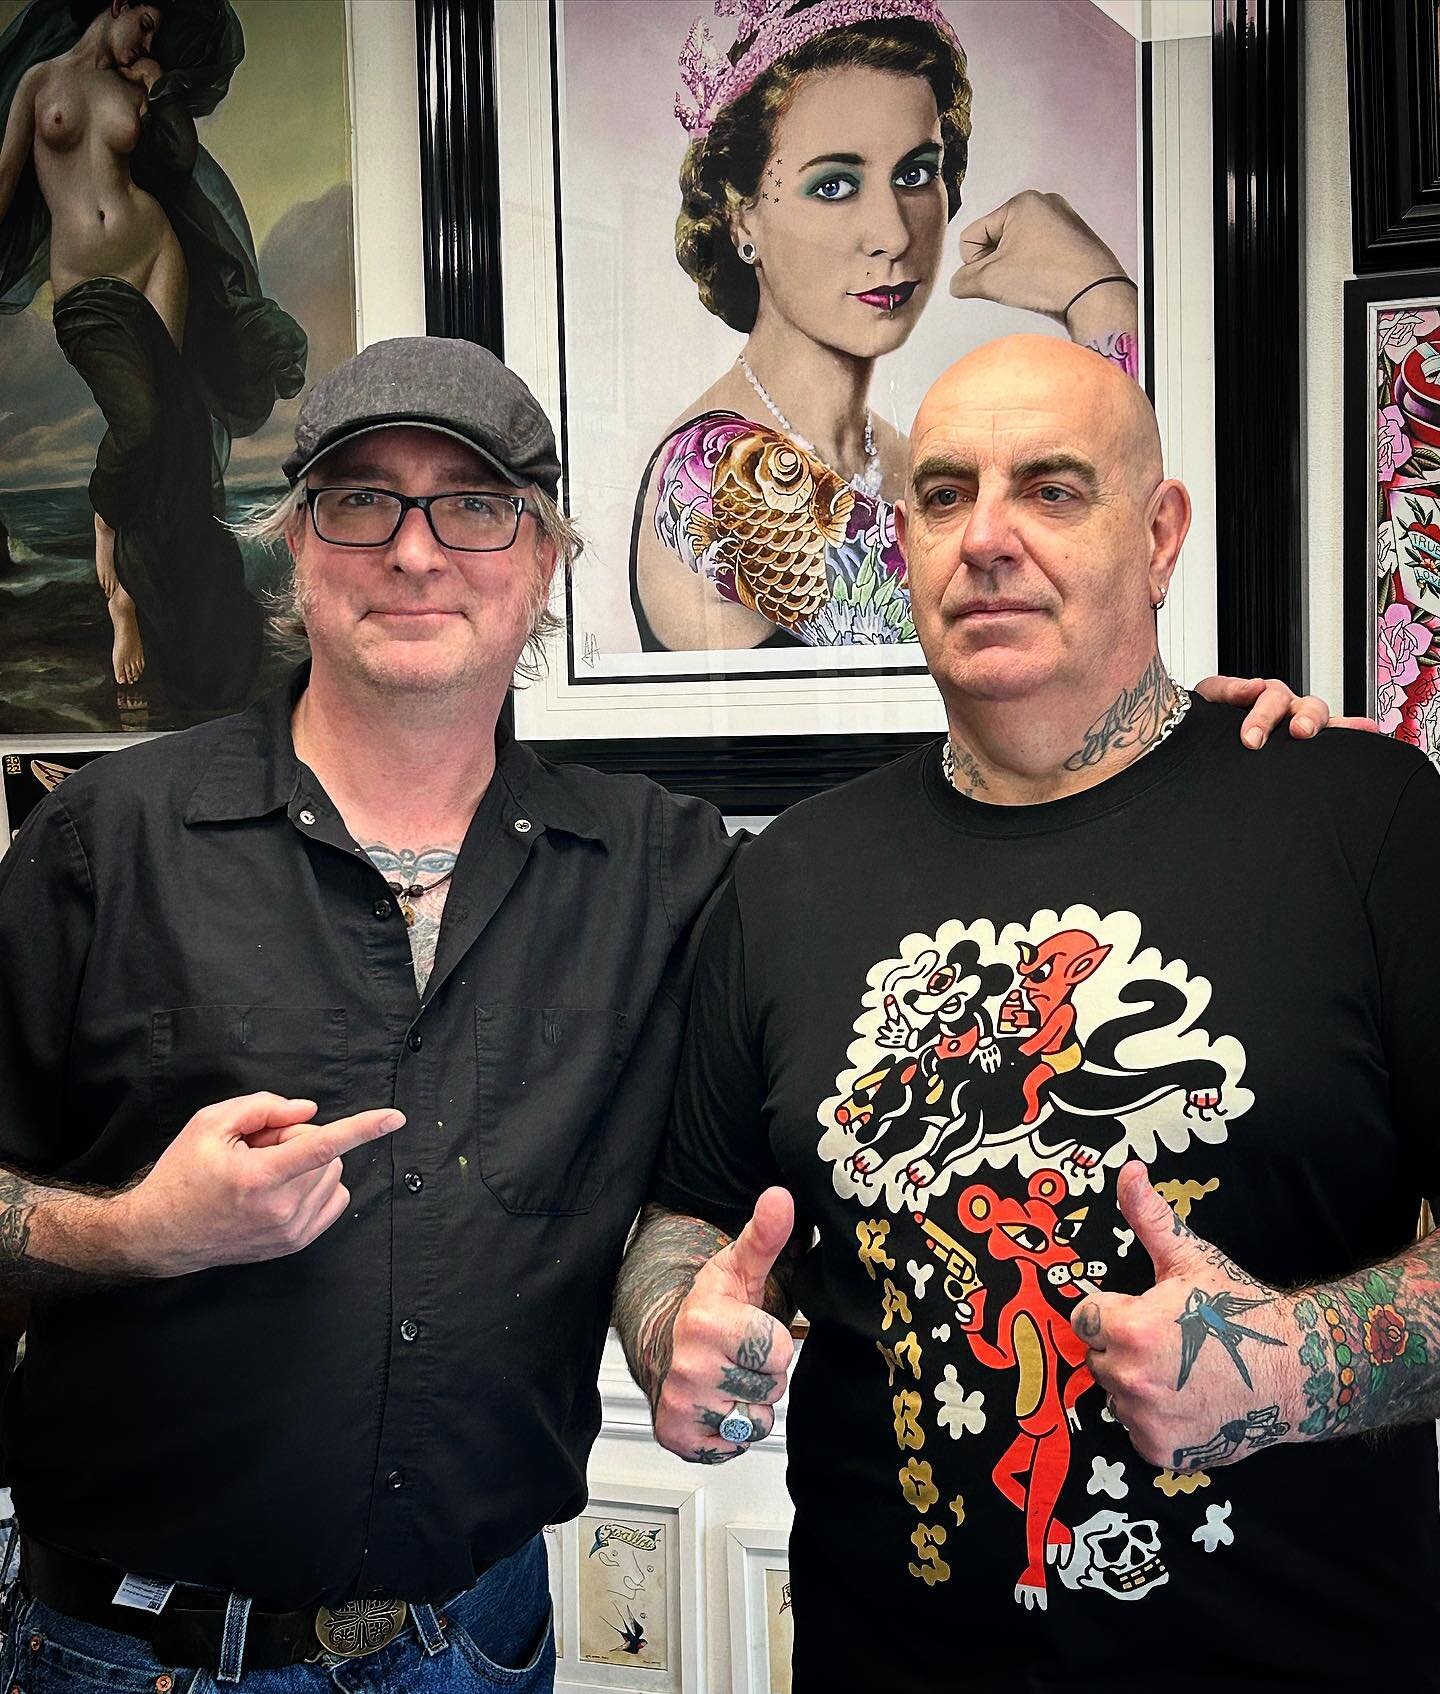 Had the pleasure to visit with the legendary @lalhardy @newwavetattoo north London. Till next time my friend🙏🏻 #england #legend #tattoohistory #tattoohistorybytattooers #englishtattoo #londonlegends #knightsoftheroundshader